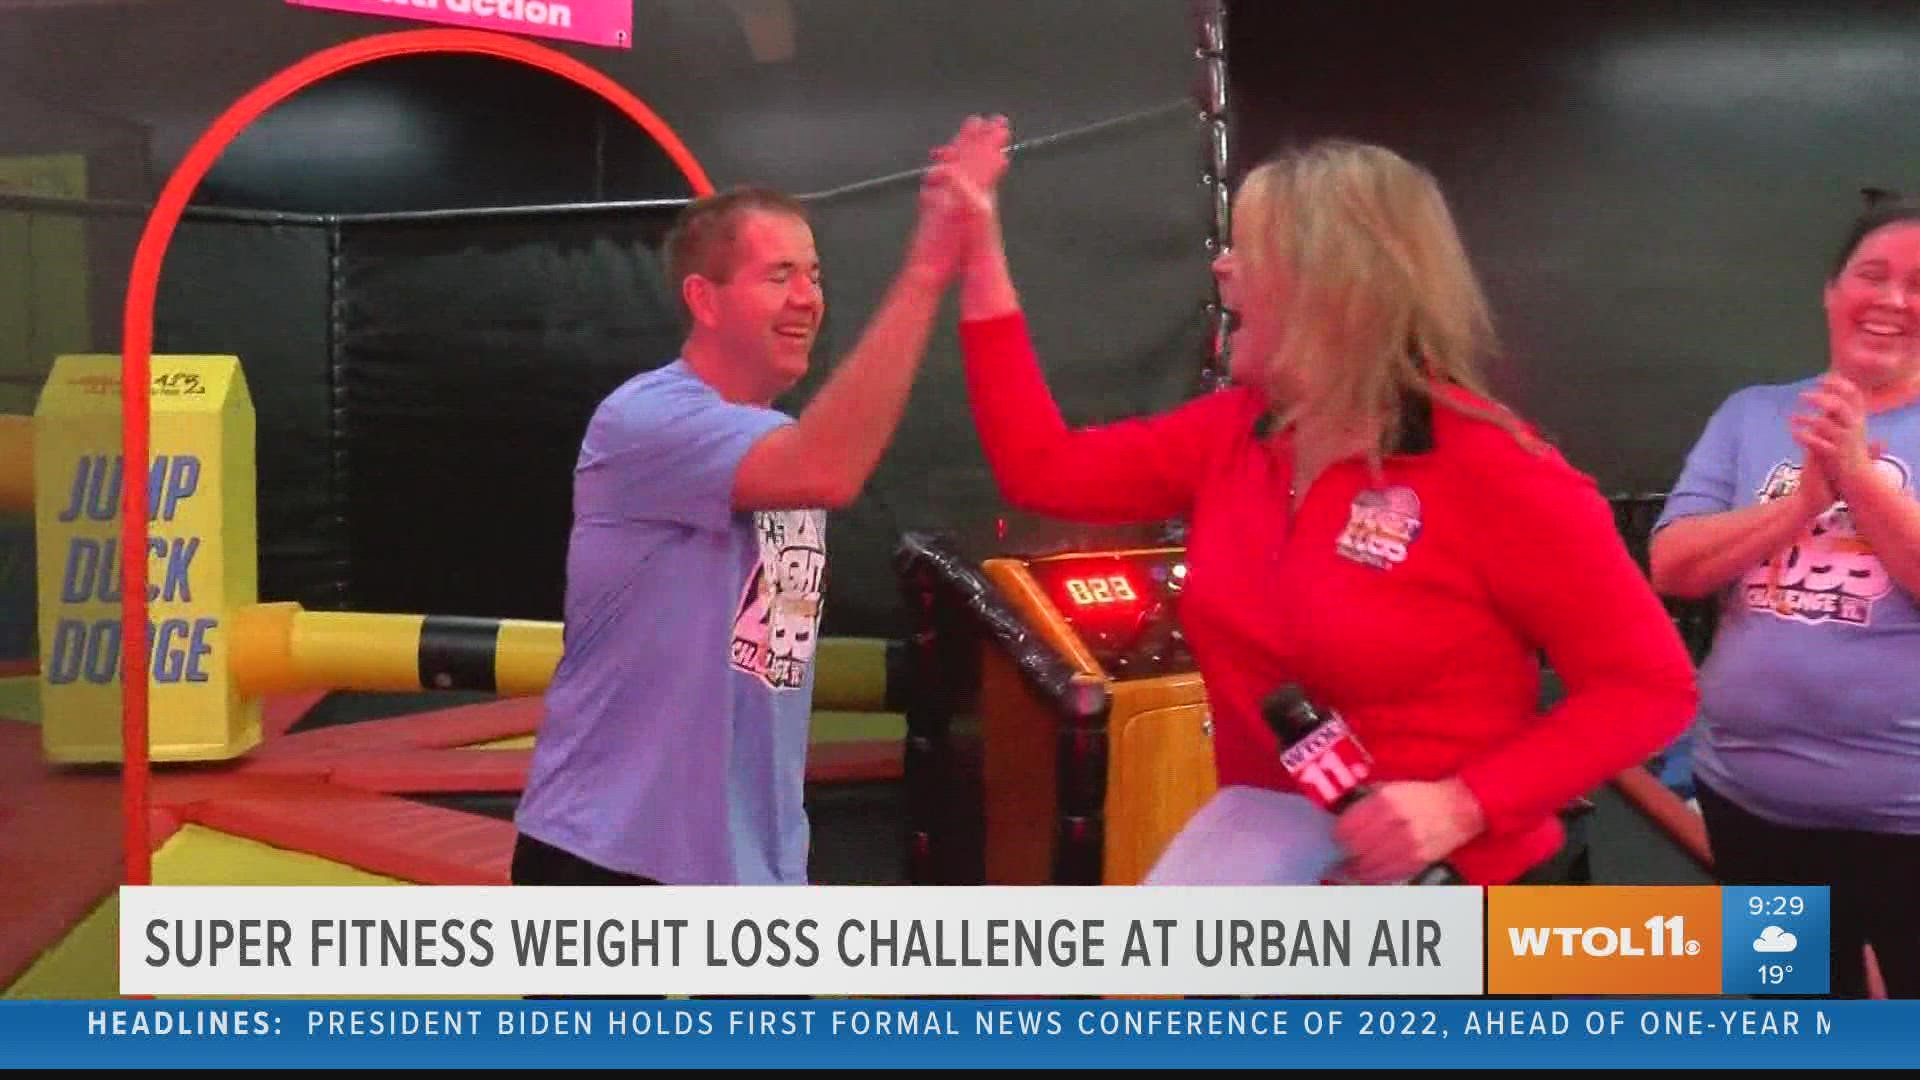 Super Fitness Weight Loss Challengers kicked off 2022 with a unique workout at Urban Air.